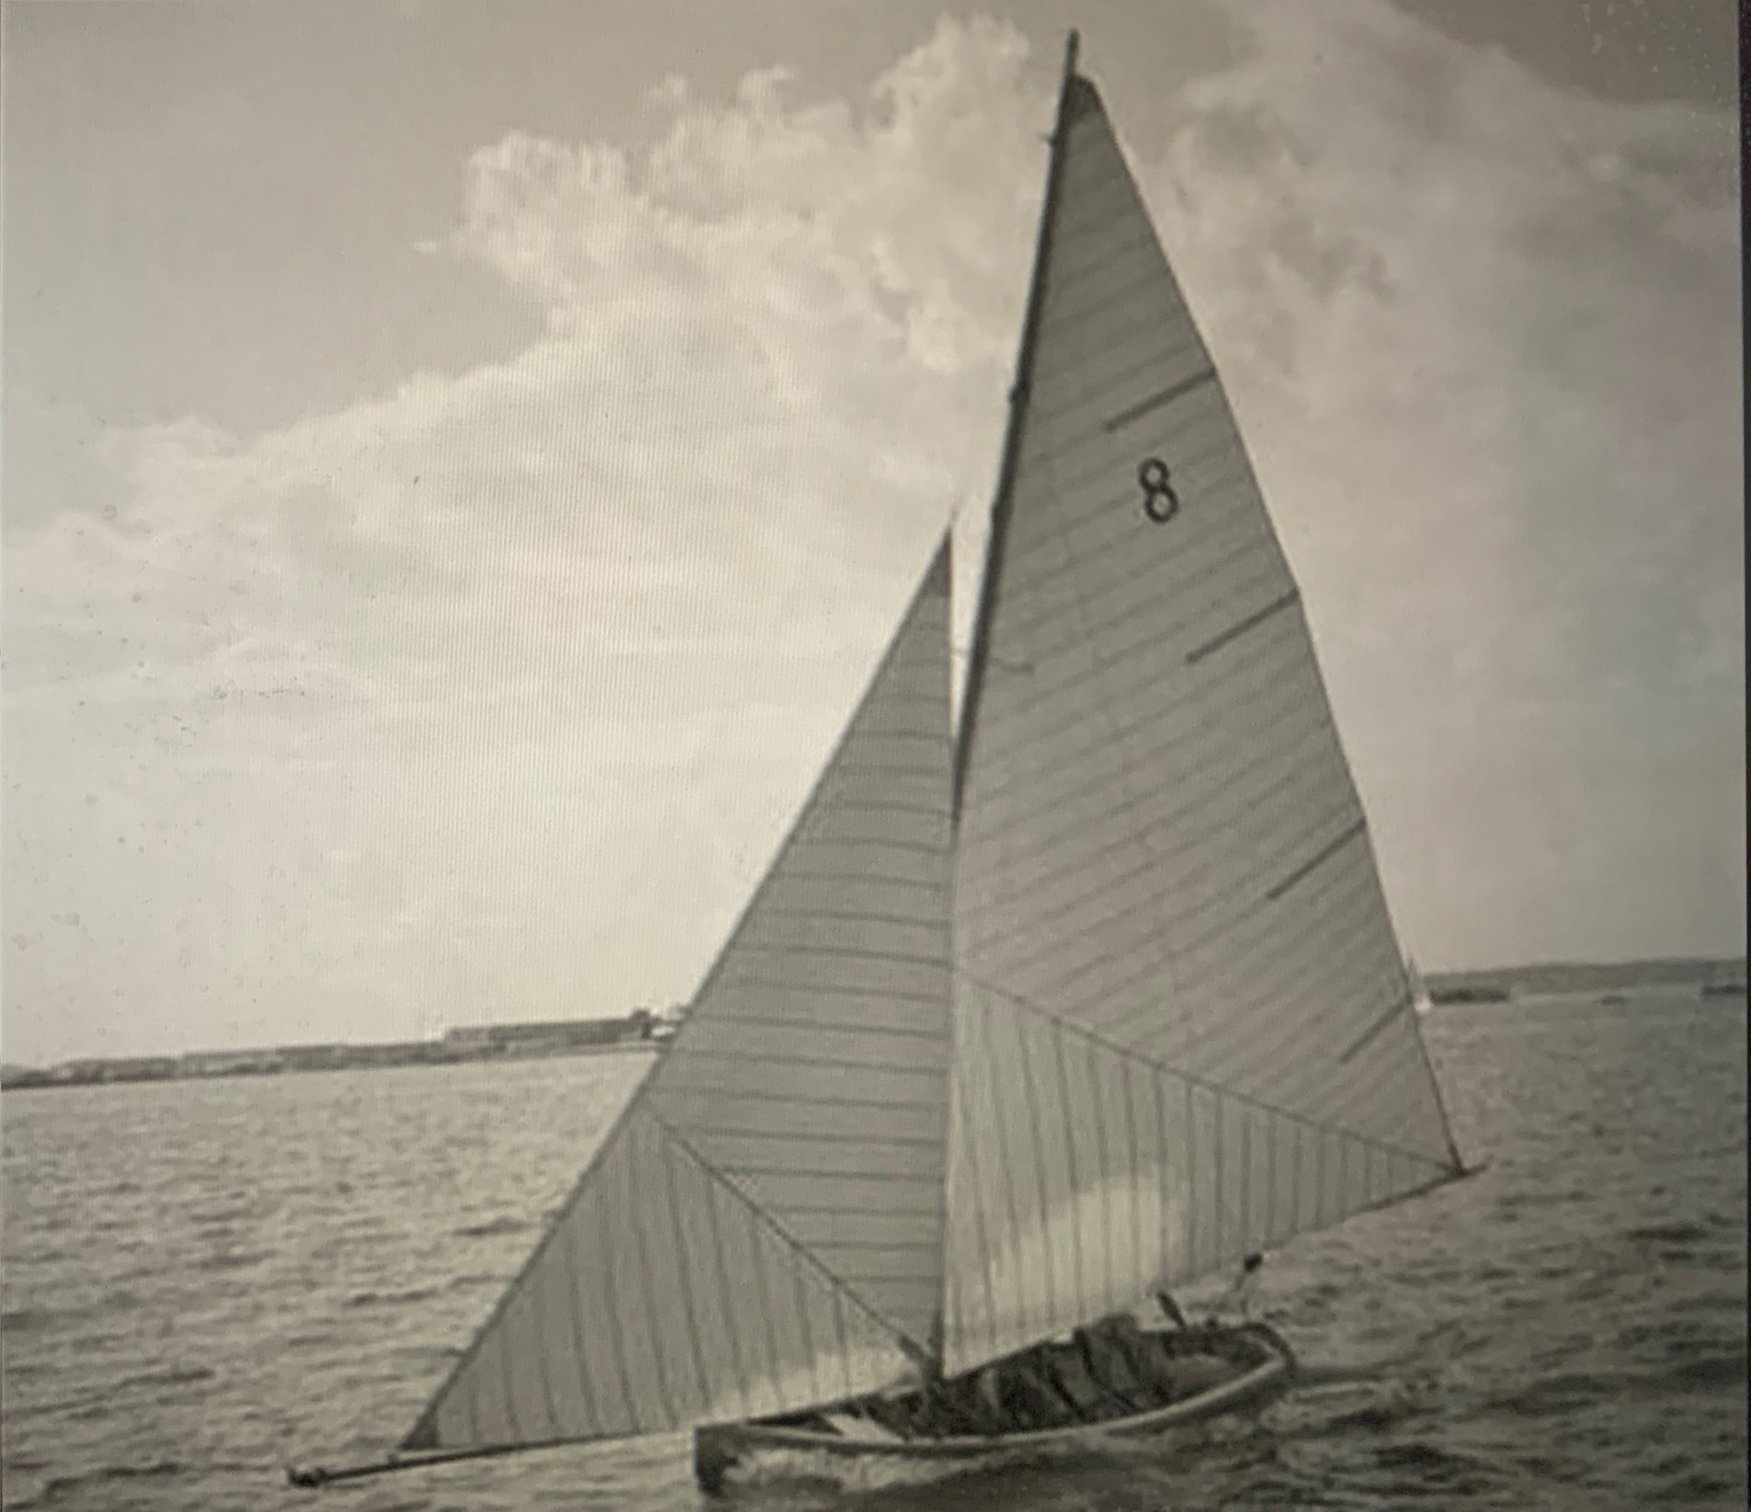 In the 60s, Mitchell photographed the Bermuda fitted dinghy